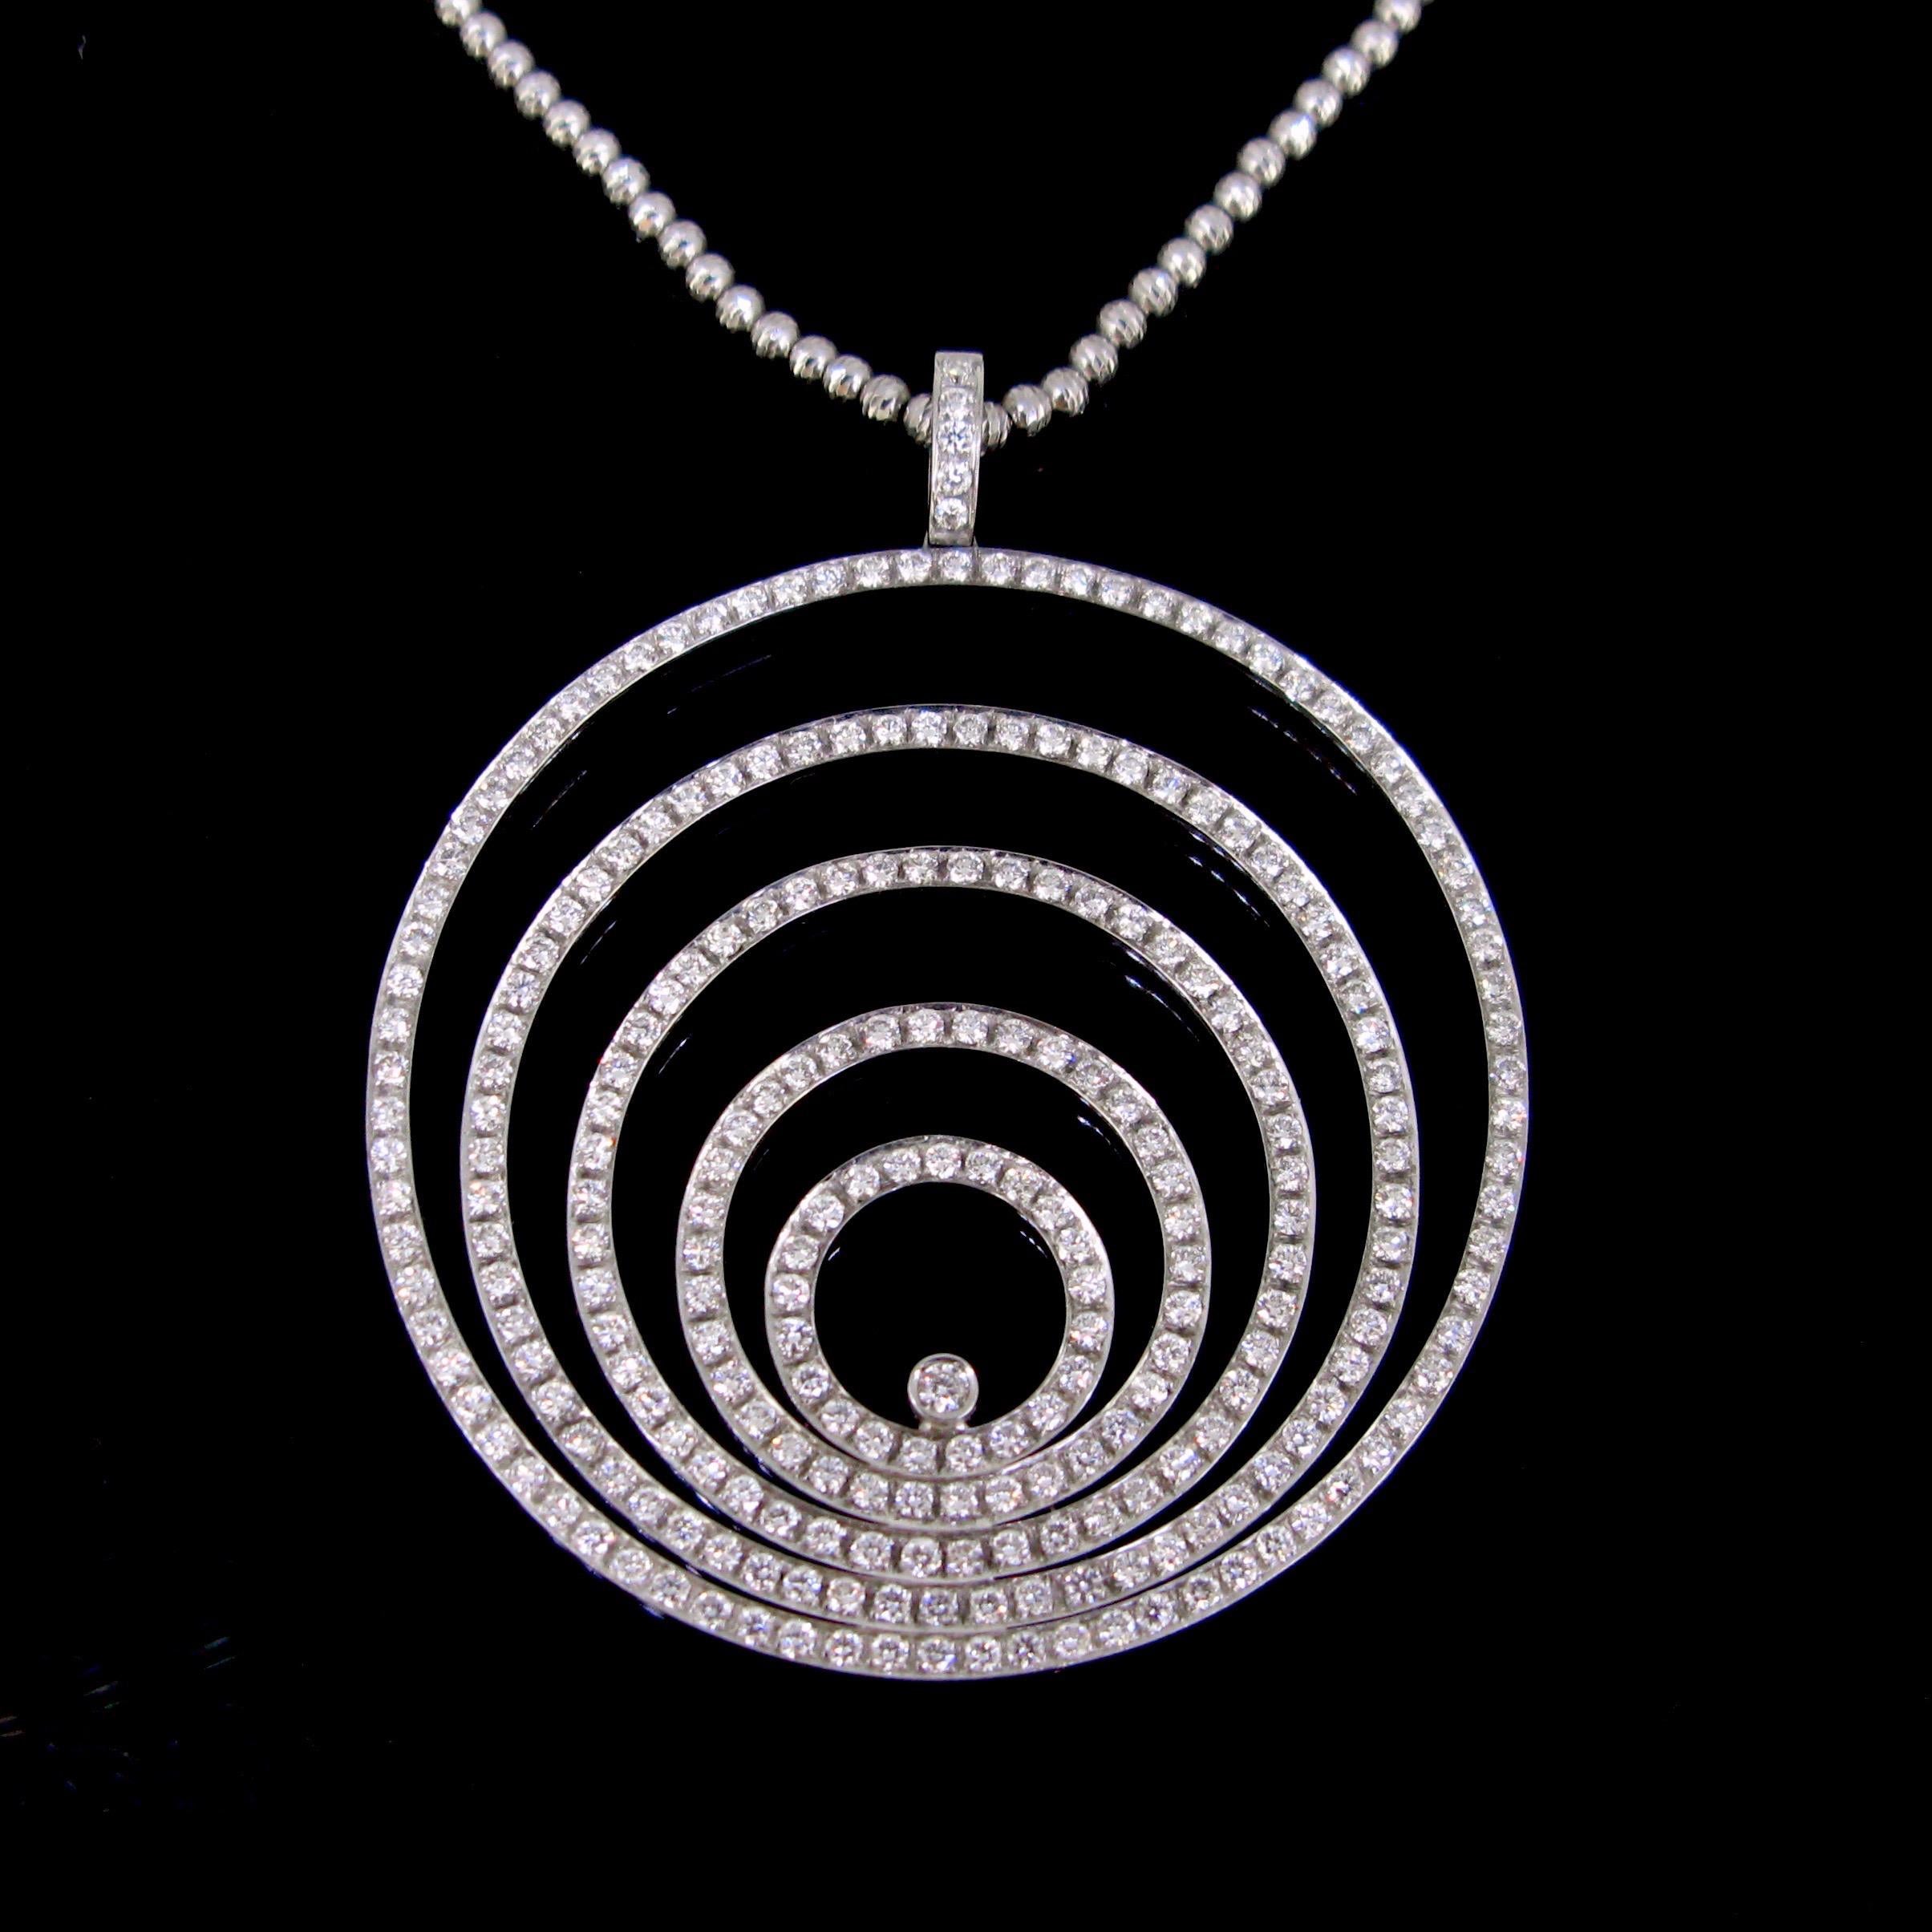 This modern and ravishing pendant comprises 5 ascending circles, all adorned with brilliant cut diamonds. It comes with a very nice 18kt white gold chain, with facetted gold beads. The chain is 40cm long. The pendant and the chain are controlled